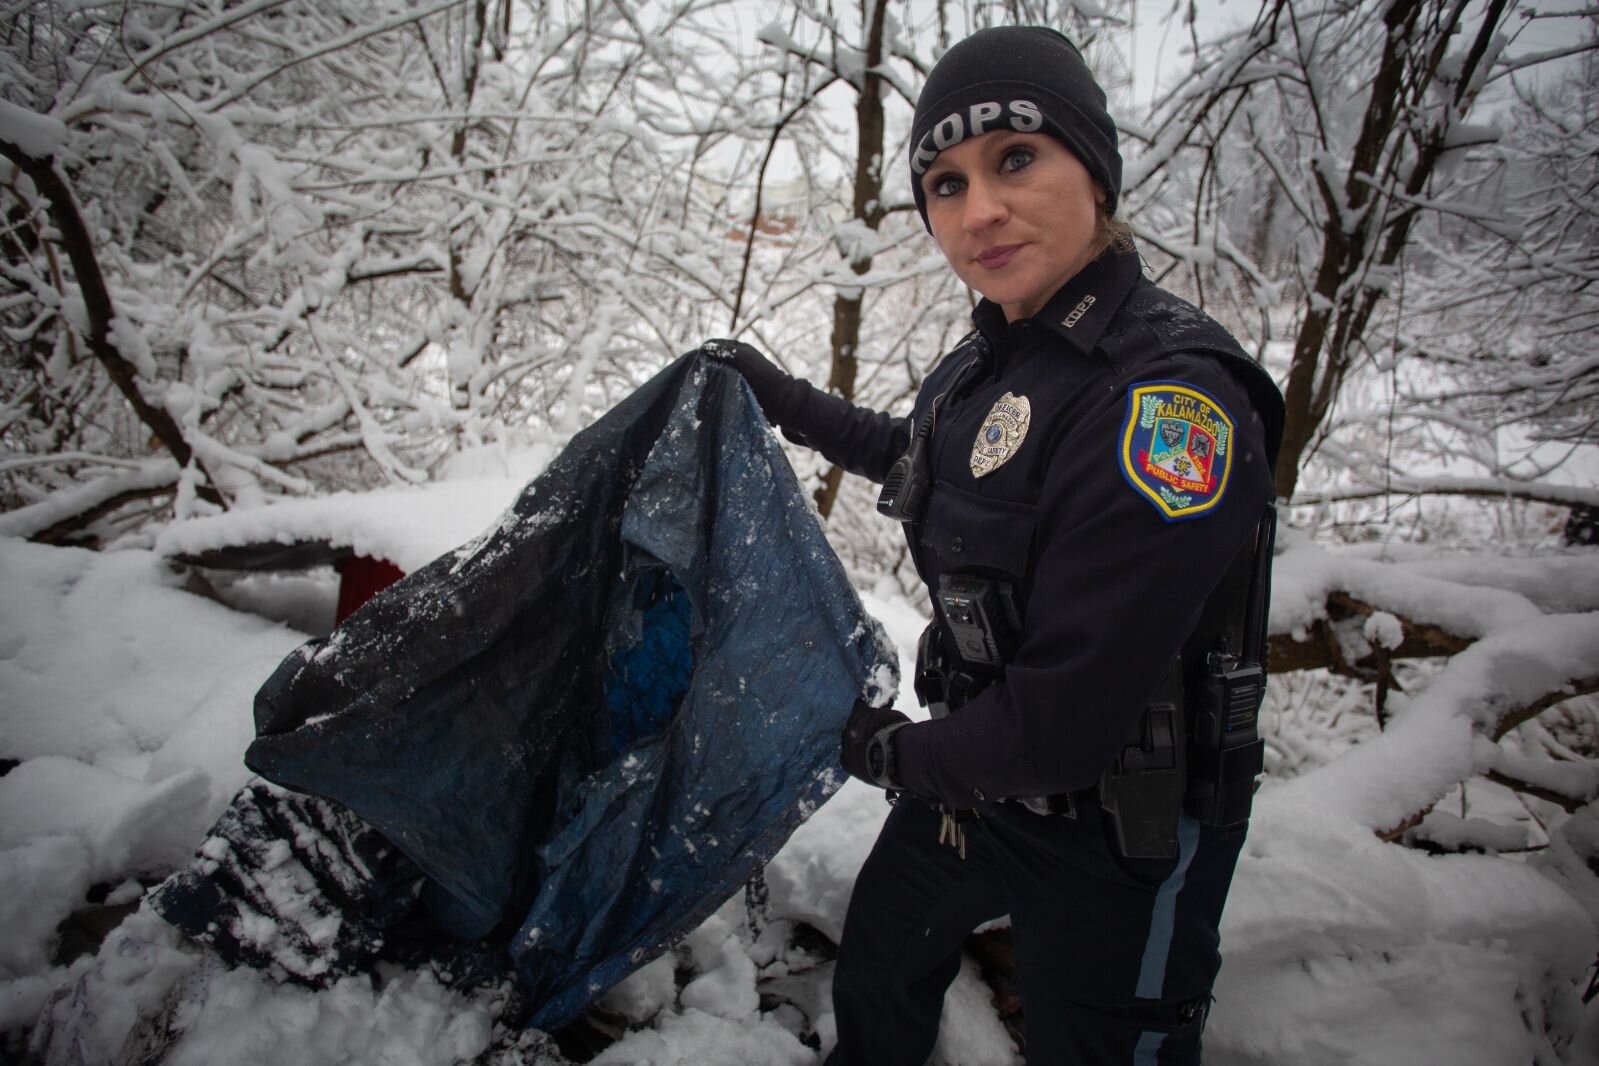 Kalamazoo Public Safety Officer Mary Miller looks at refuse left at a site where unhoused people camped. 